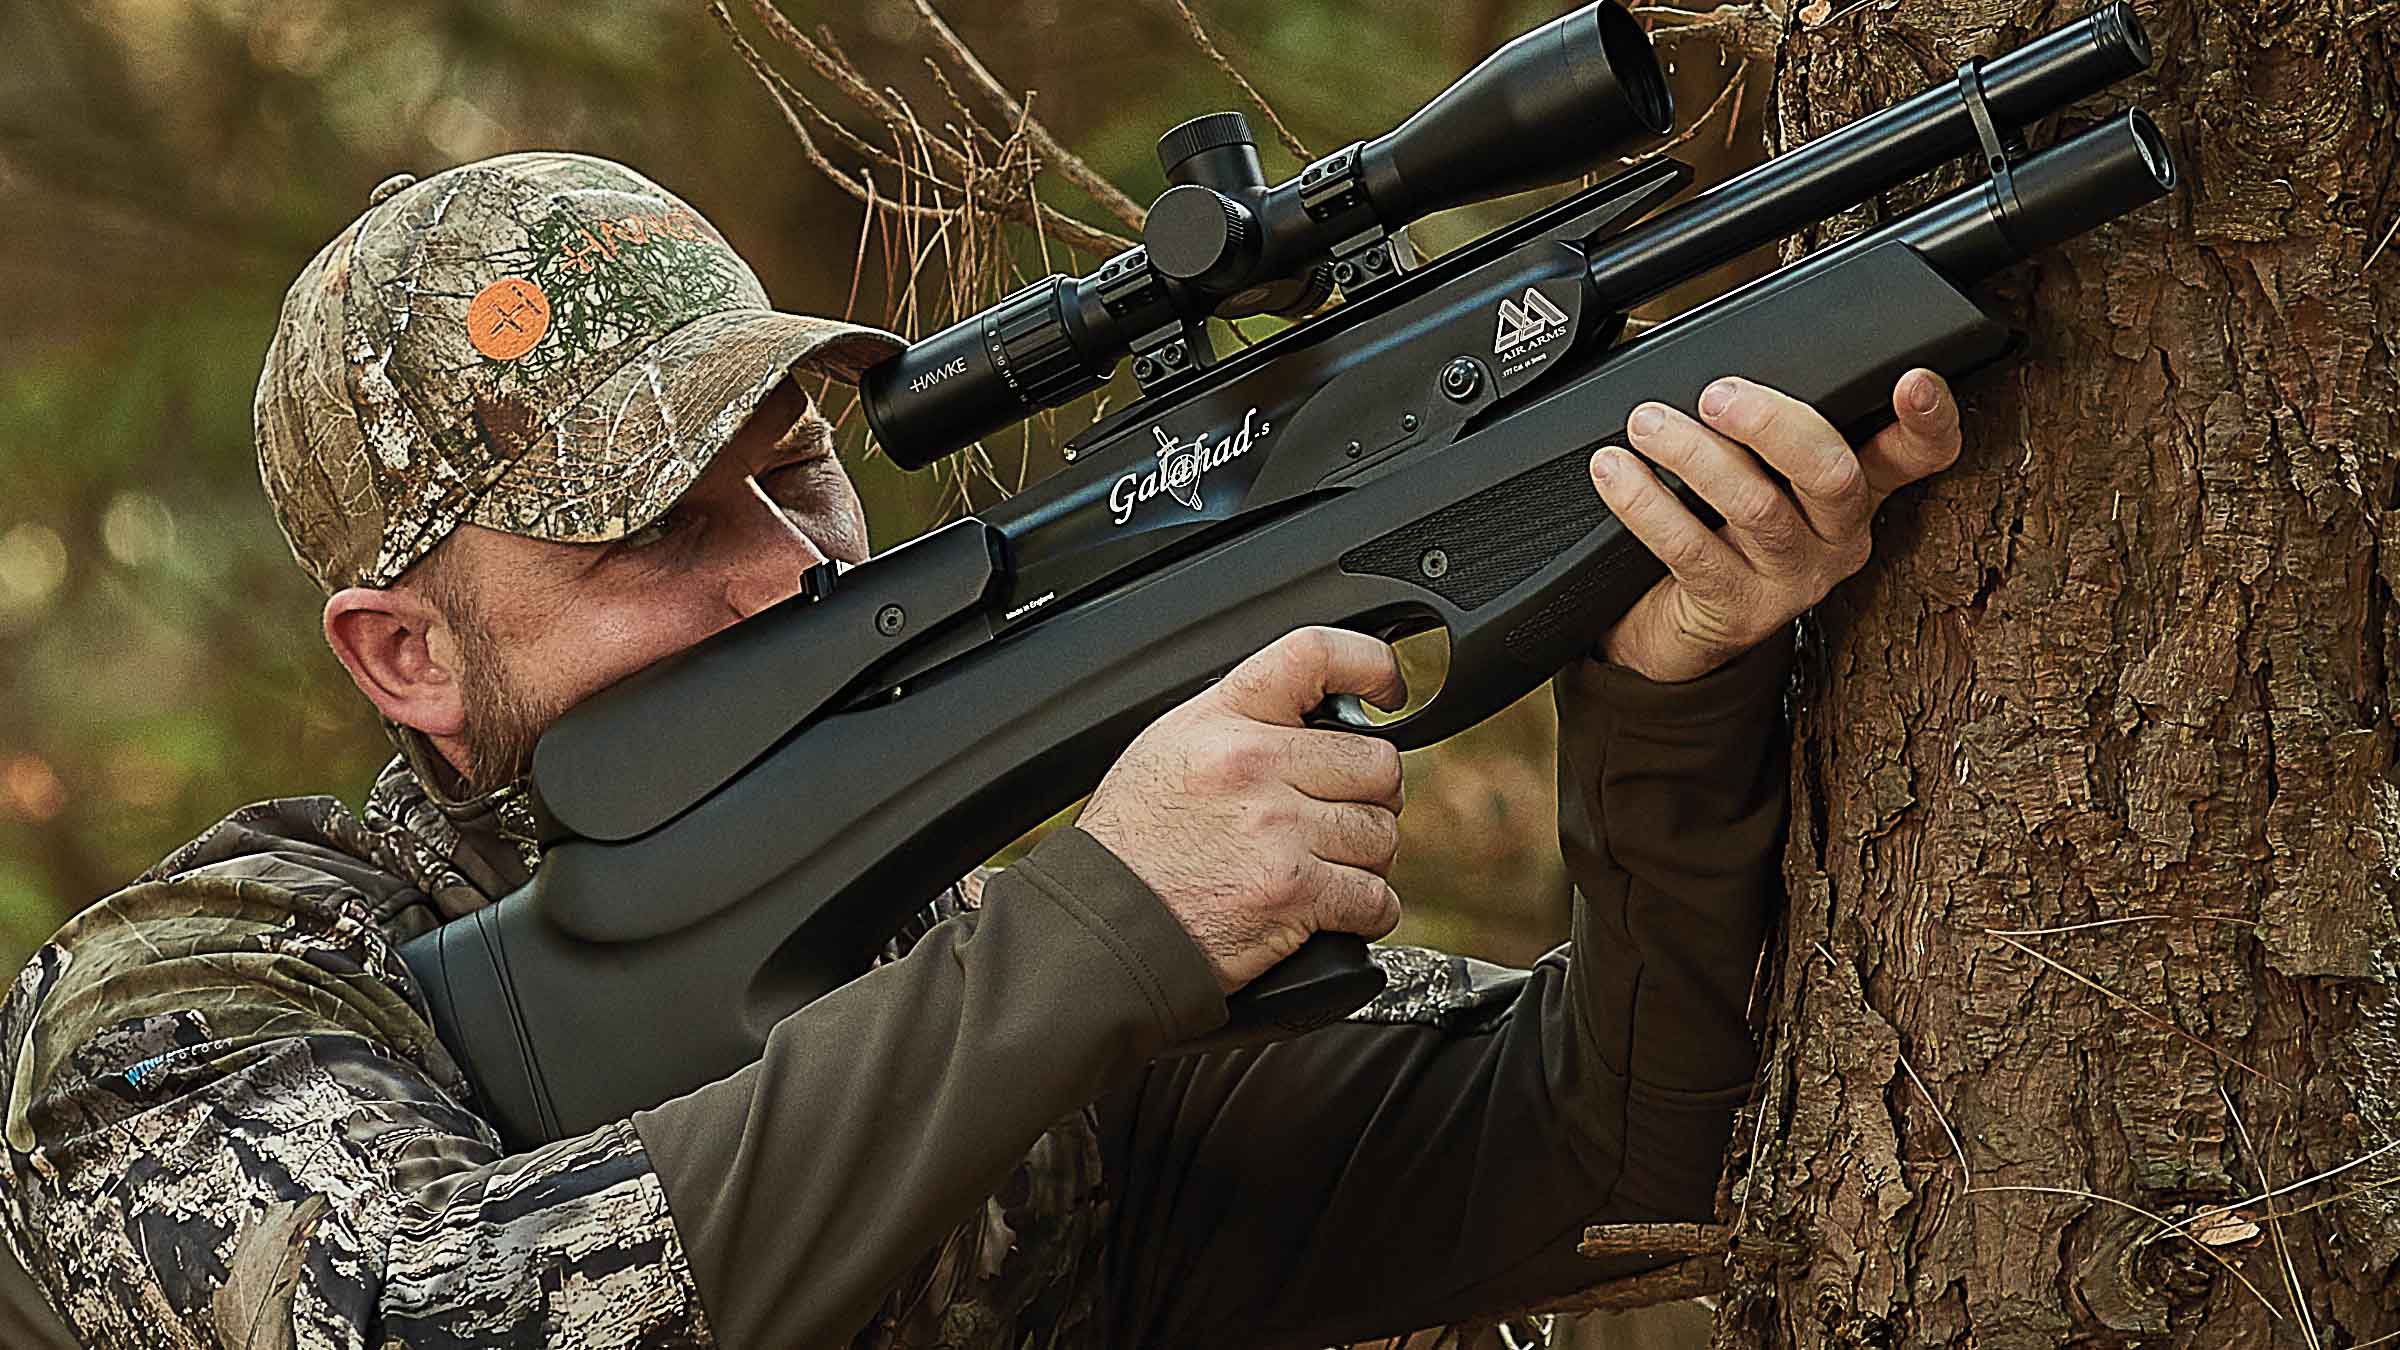 Hunting with an Air arms rifle – What You Should Know